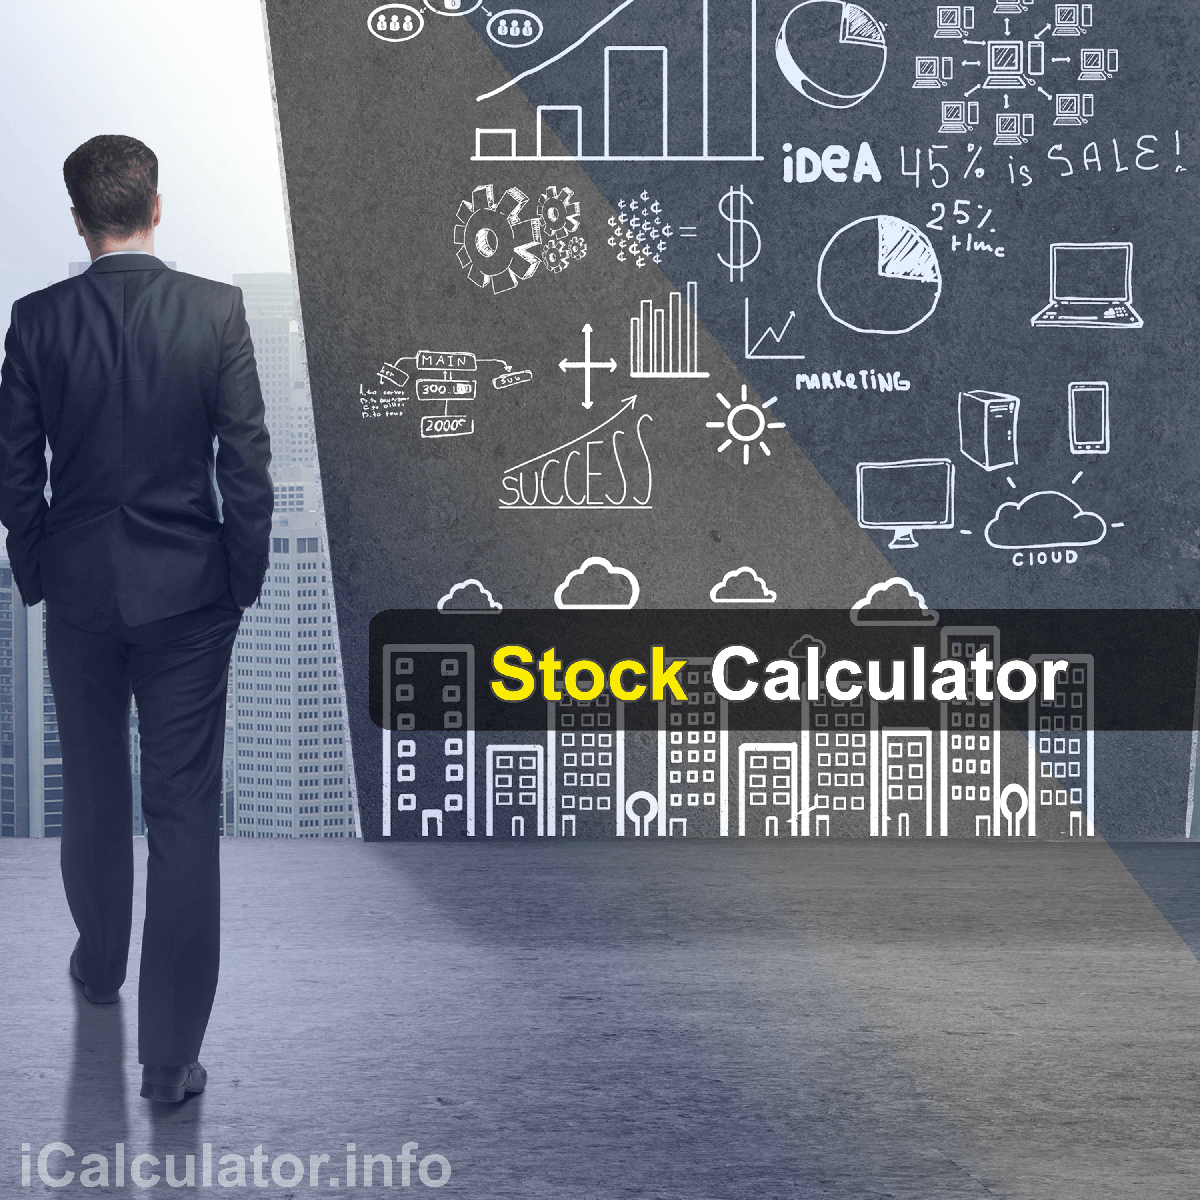 Stock Profit Calculator. This image provides details of how to calculate stock profit using a calculator and notepad. By using the stock profit formula, the Stock Profit Calculator provides a true calculation of the actual value of returns on your investments